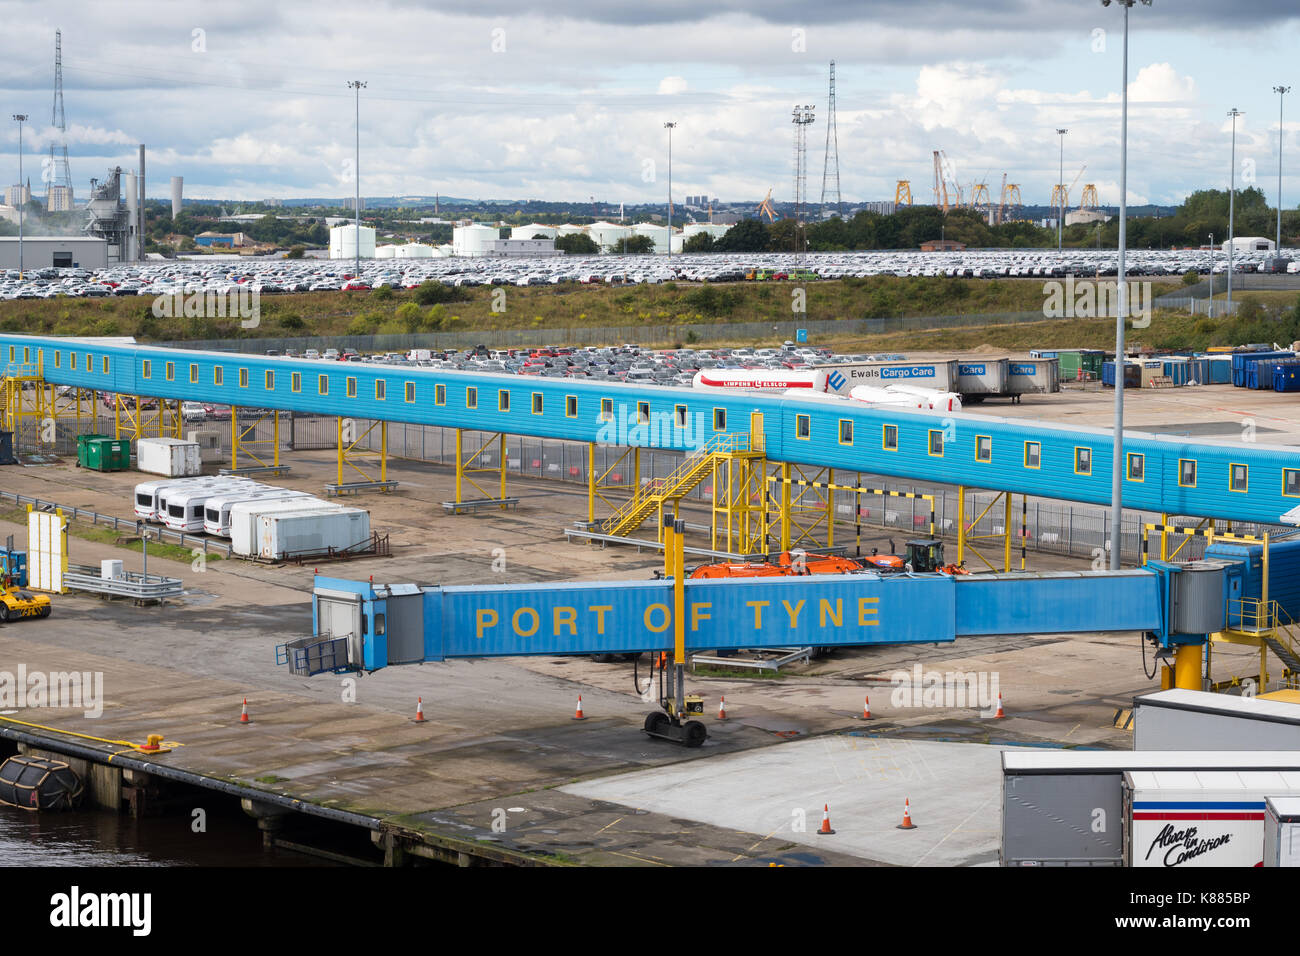 The Port of Tyne International Passenger Terminal, with rows of imported VW group cars in the background. North Shields, England, UK Stock Photo